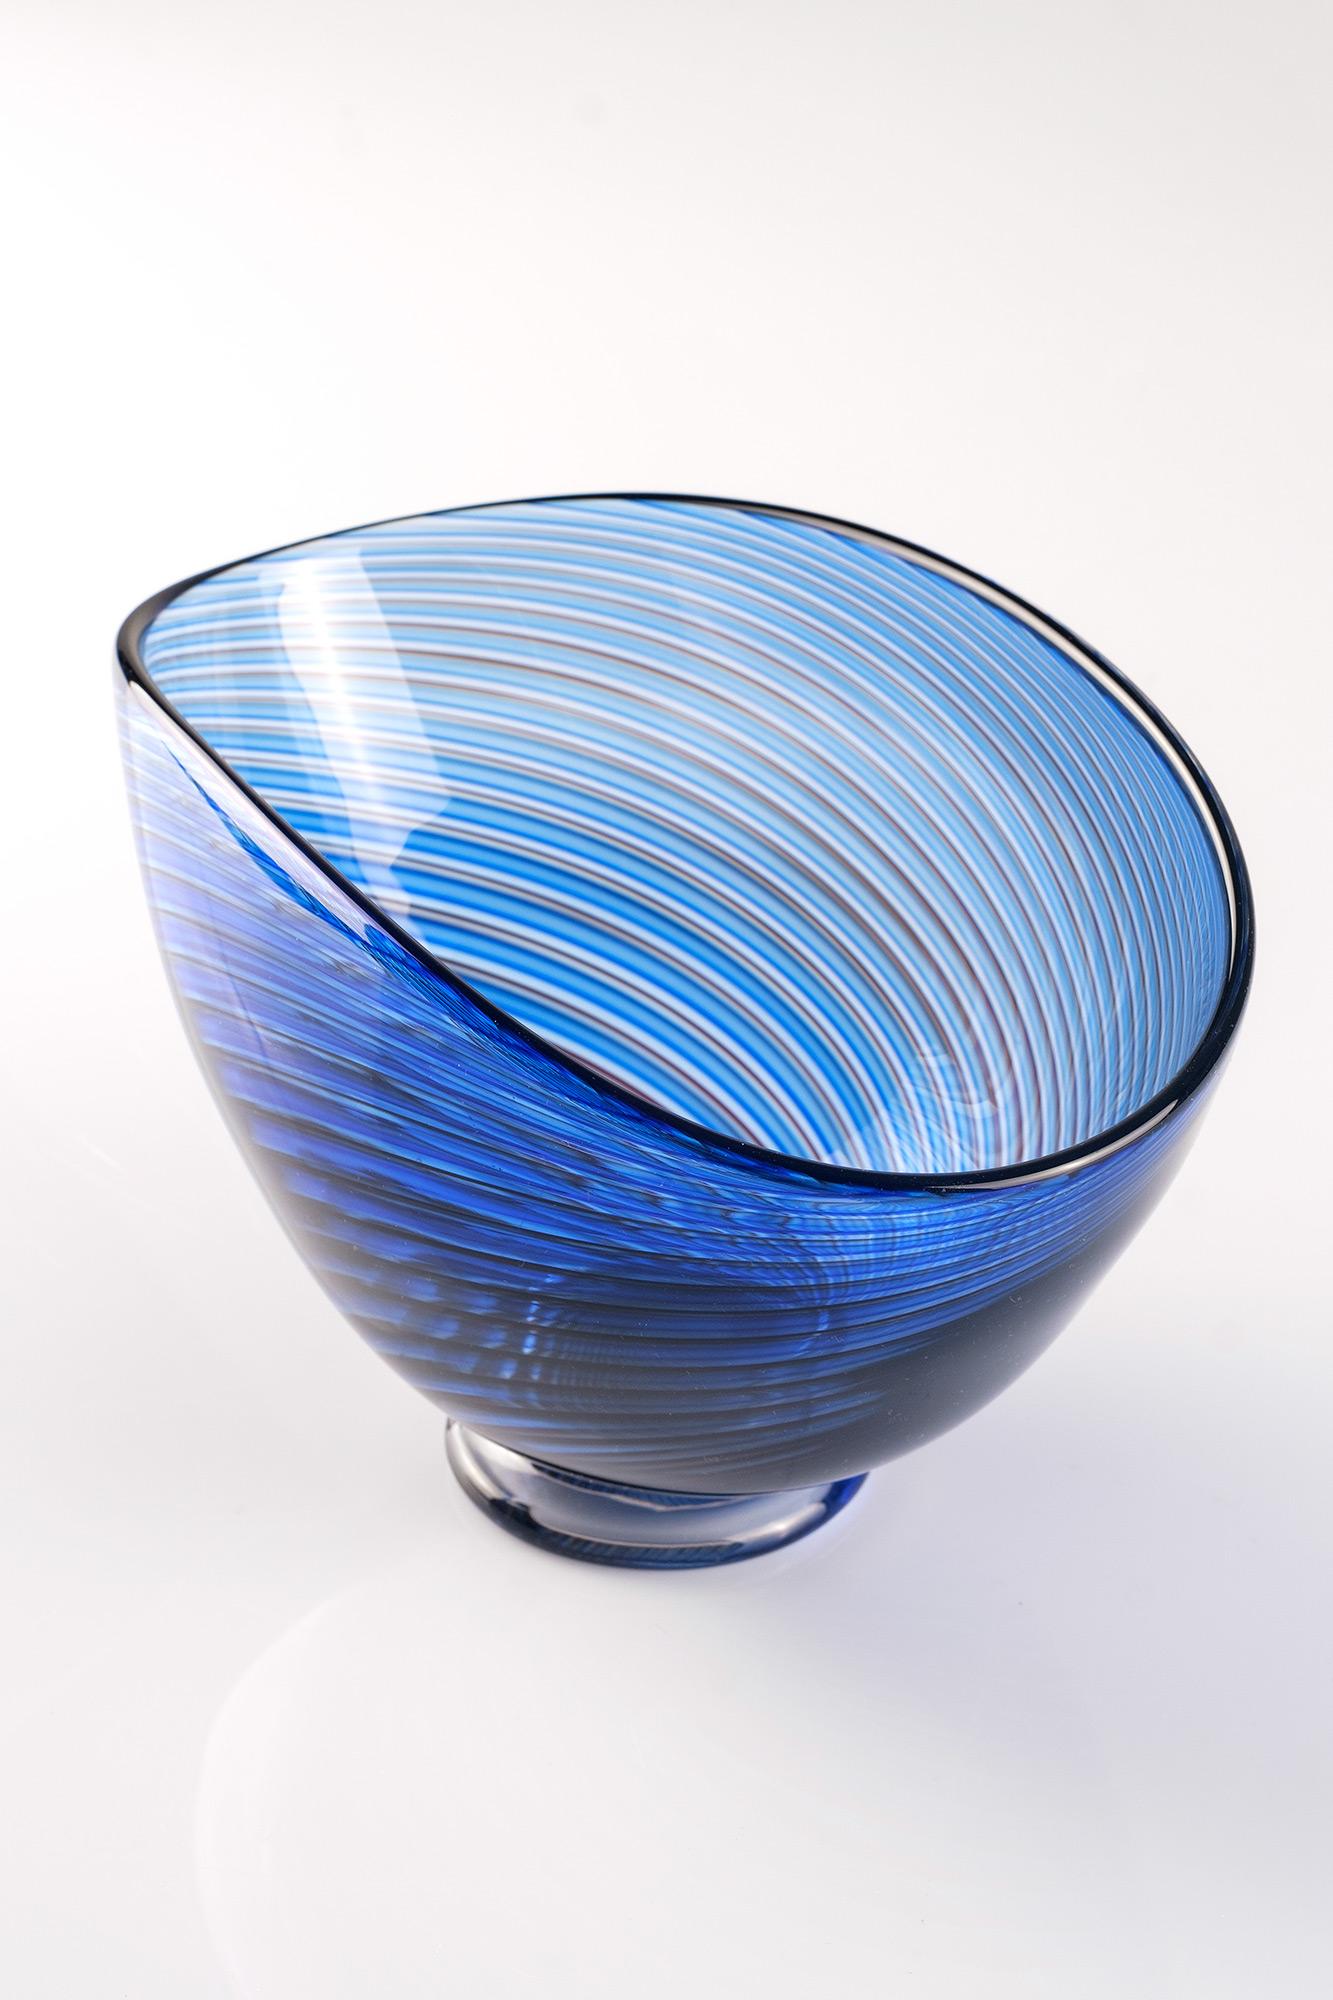 Colora glass bowl with dark purple and blue threads, model LC5 by Vicke Lindstrand (1904-1983) for Kosta, Sweden 1950's
Etched Signature